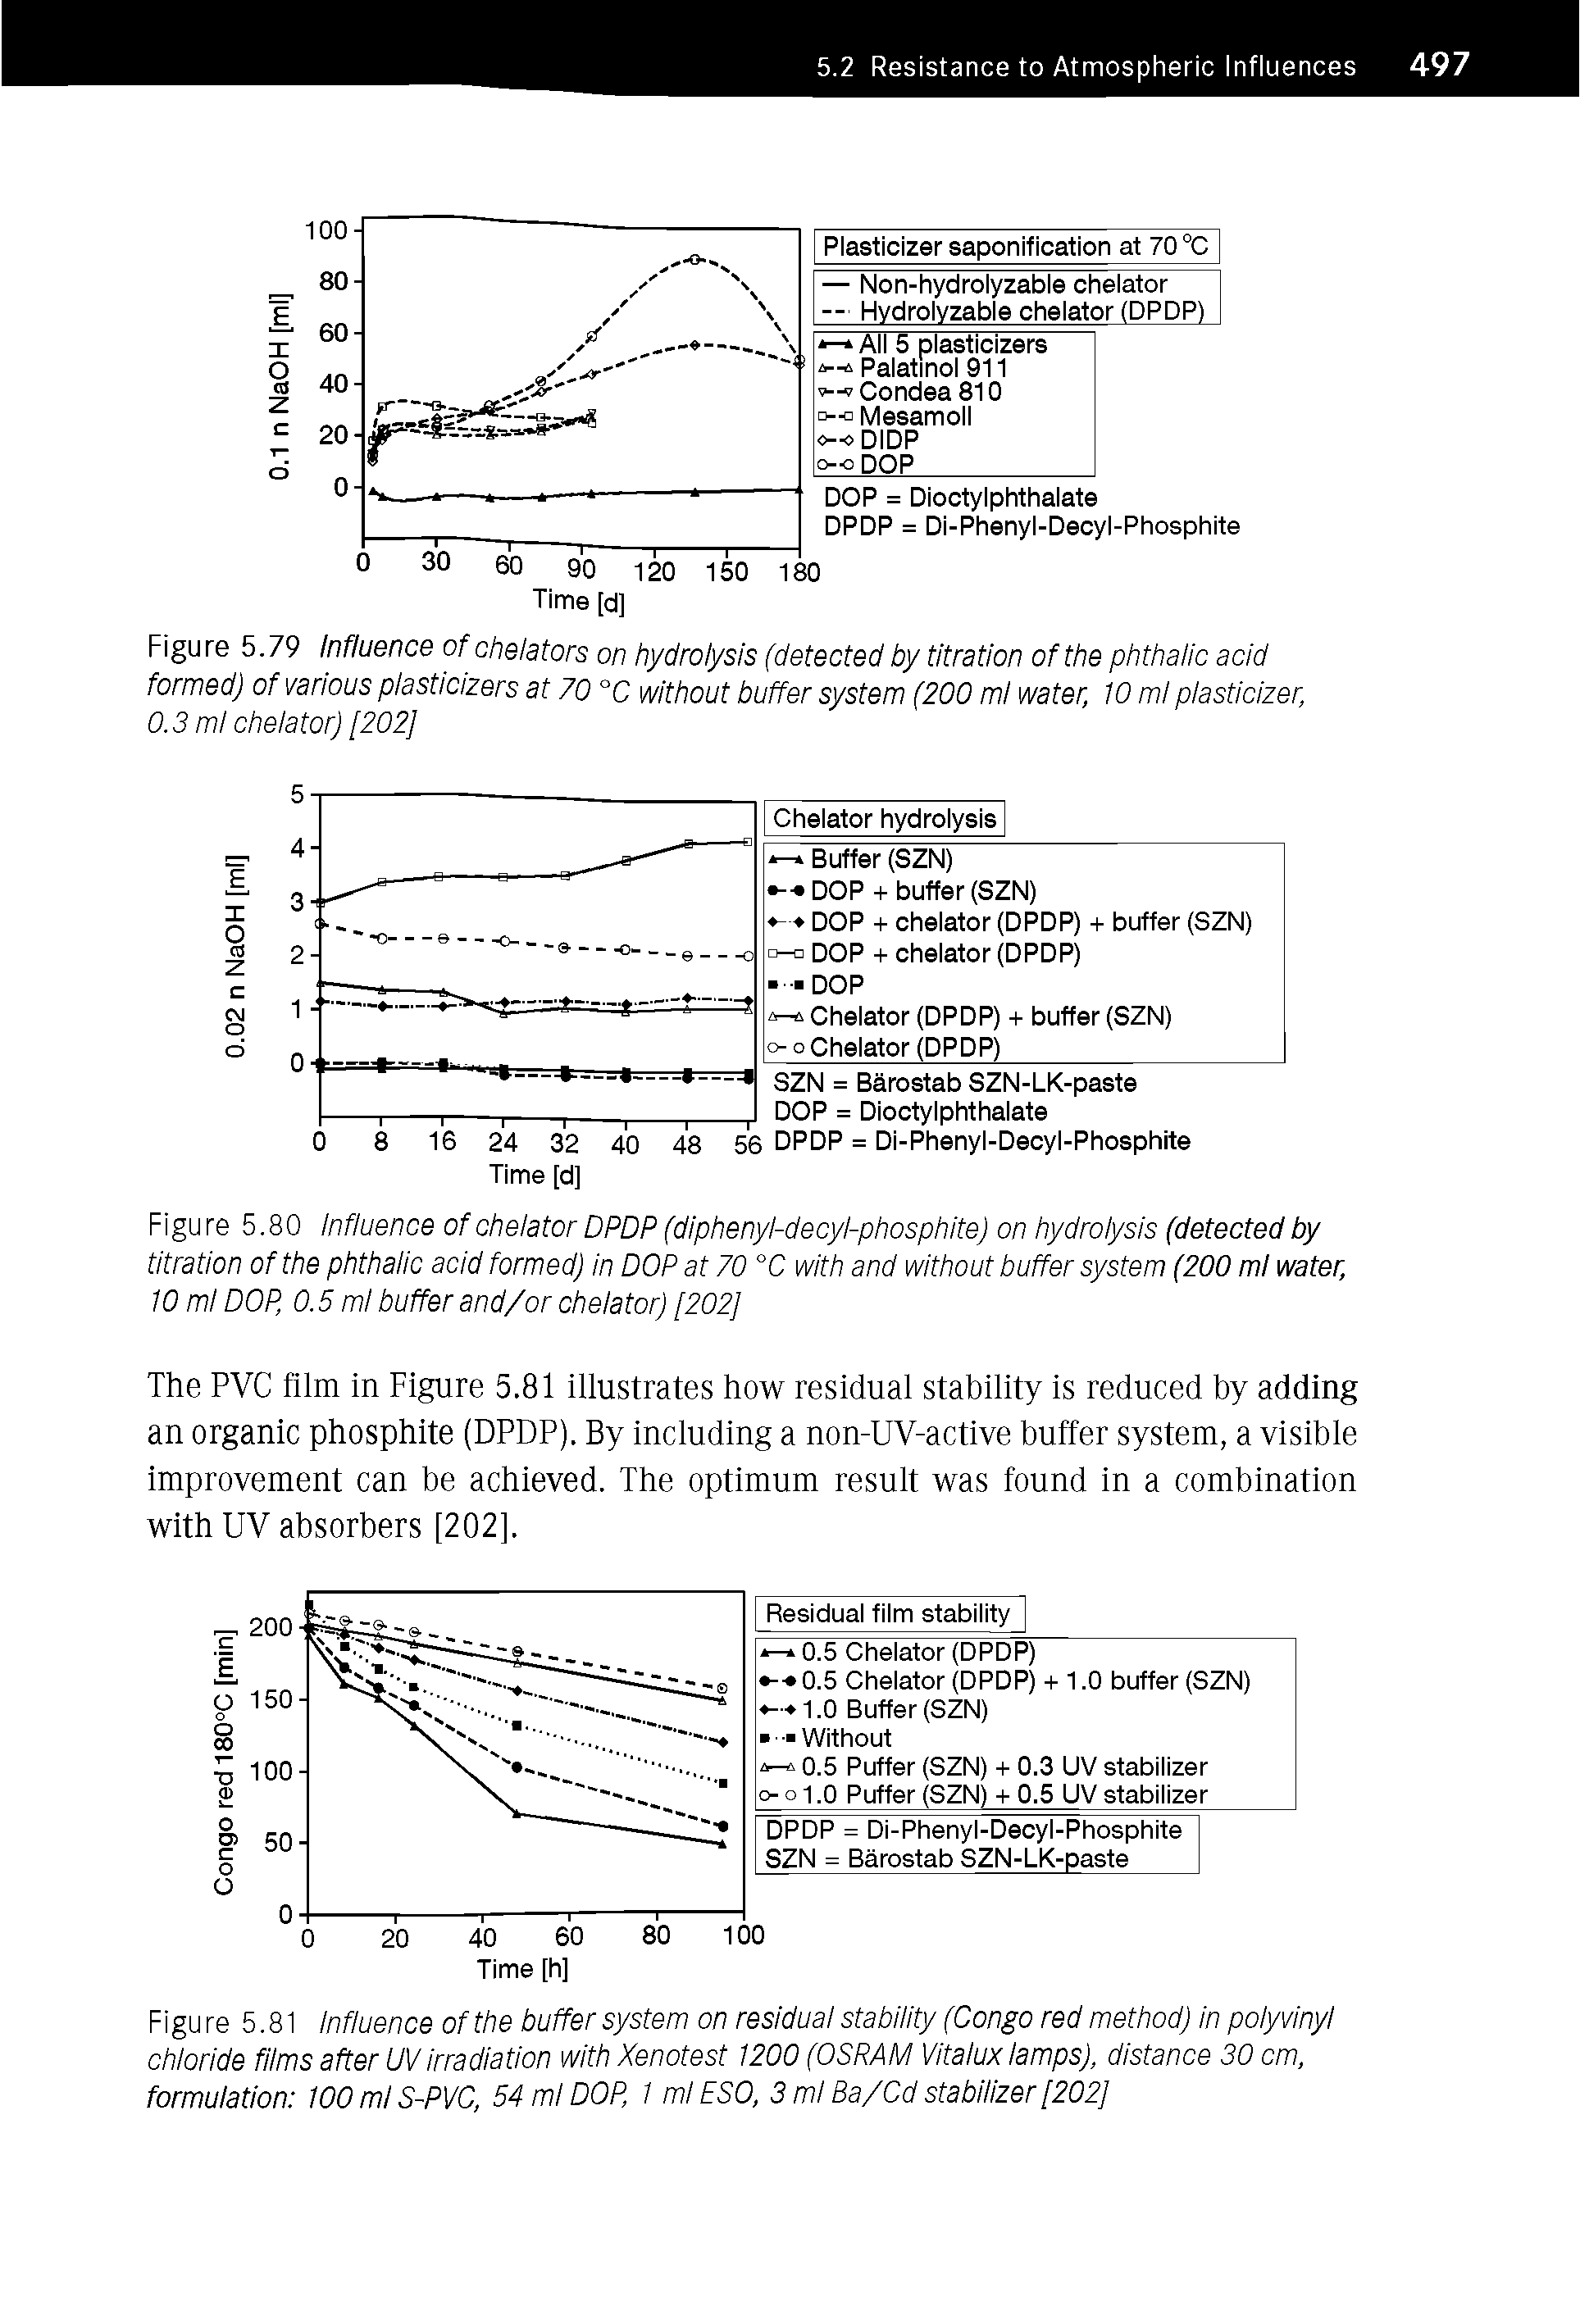 Figure 5.80 Influence of chelator DPDP (diphenyl-decyl-phosphite) on hydrolysis (detected by titration of the phthaiic acid formed) in DOP at 70 °C with and without buffer system (200 ml water, 10 ml DOP, 0.5 ml buffer and/or ohelator) [202]...